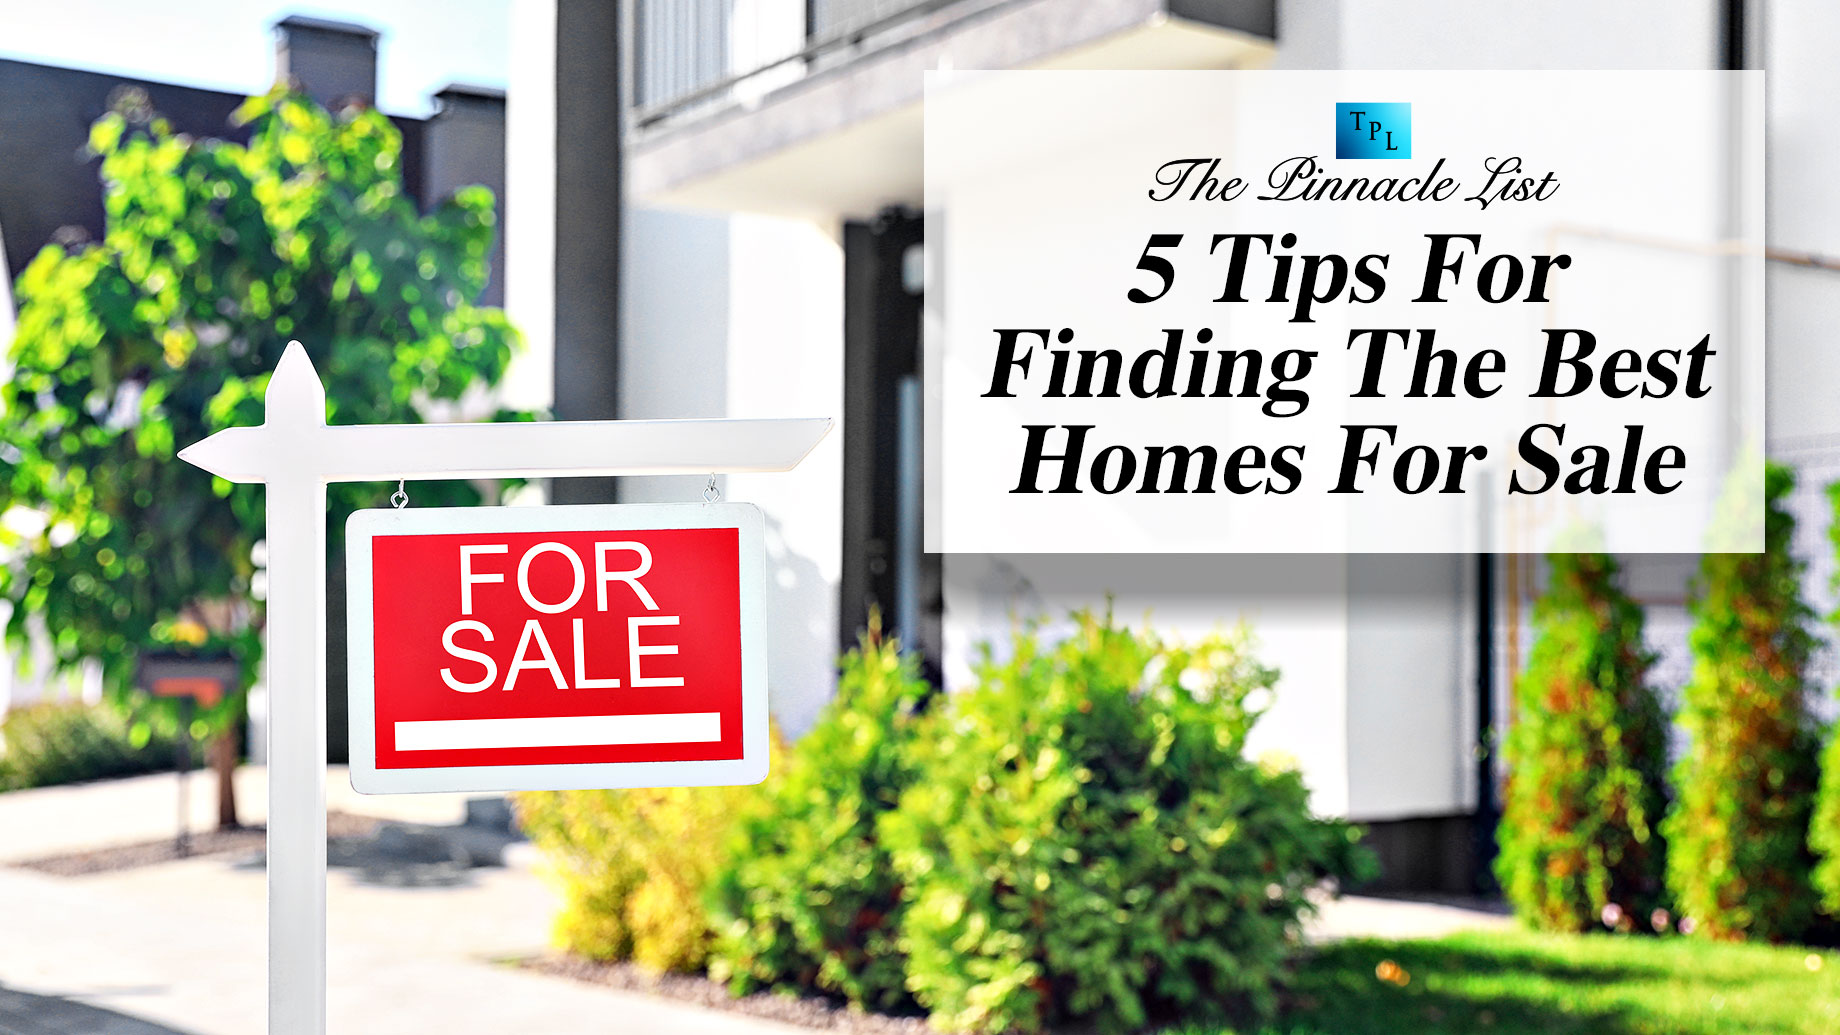 5 Tips For Finding The Best Homes For Sale